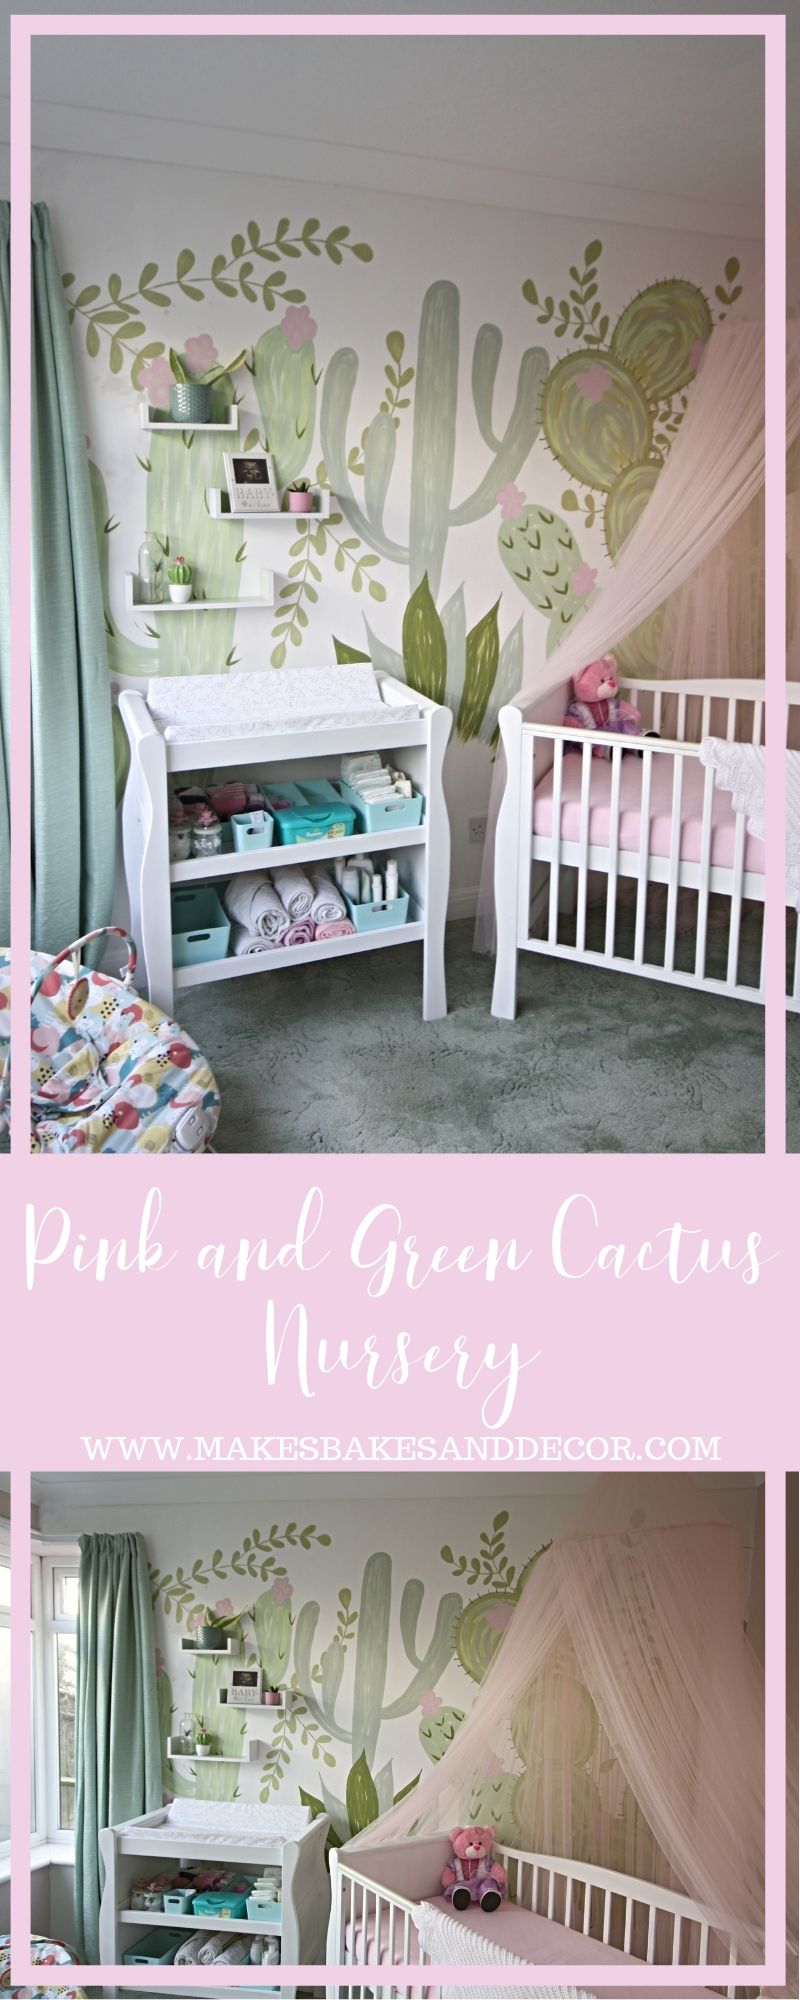 pink and green cactus nursery